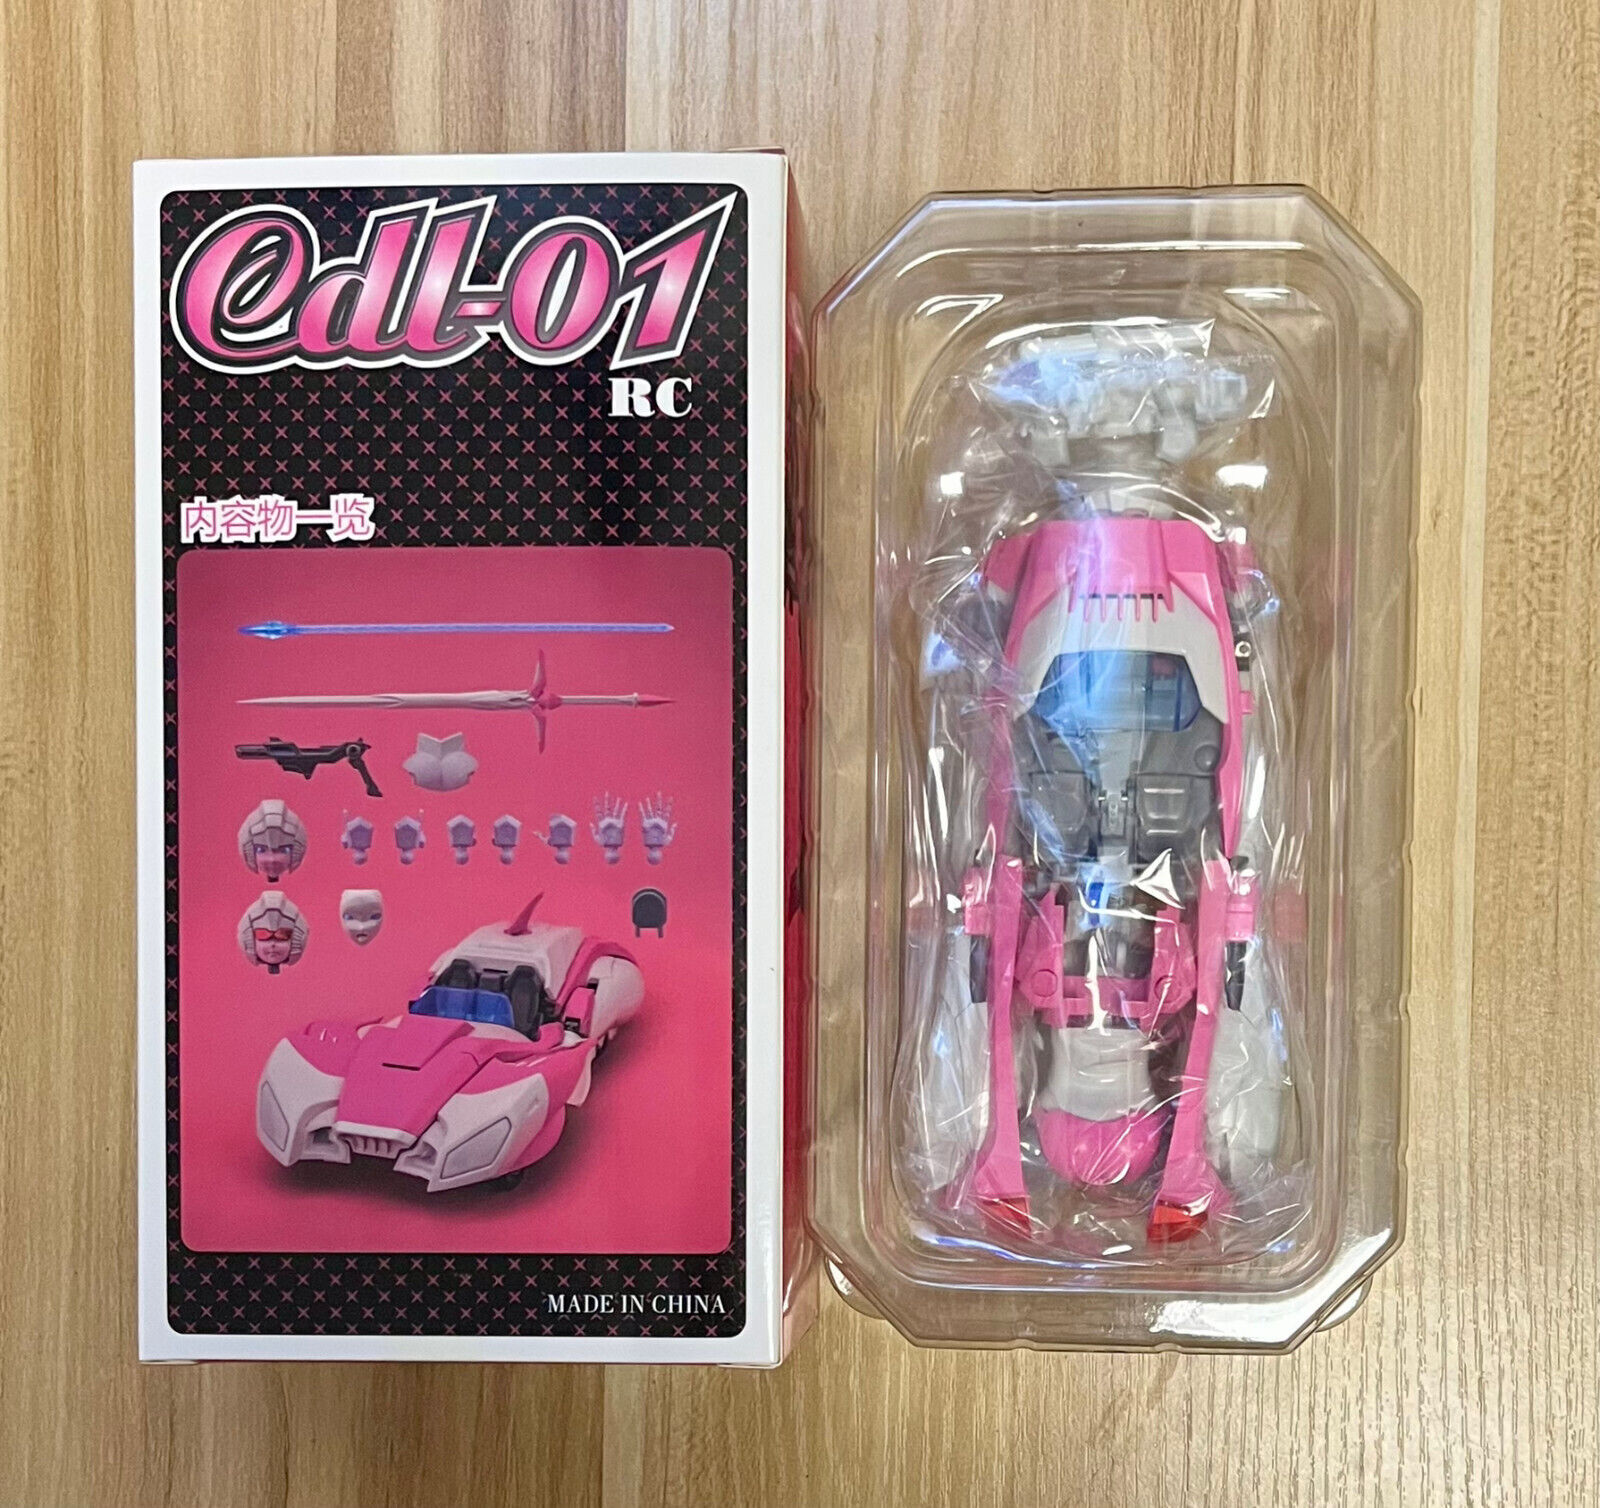 CDL-01 CDL01 RC Arcee with Upgrade Kit MP CDL Action Figure toy 19CM Gift